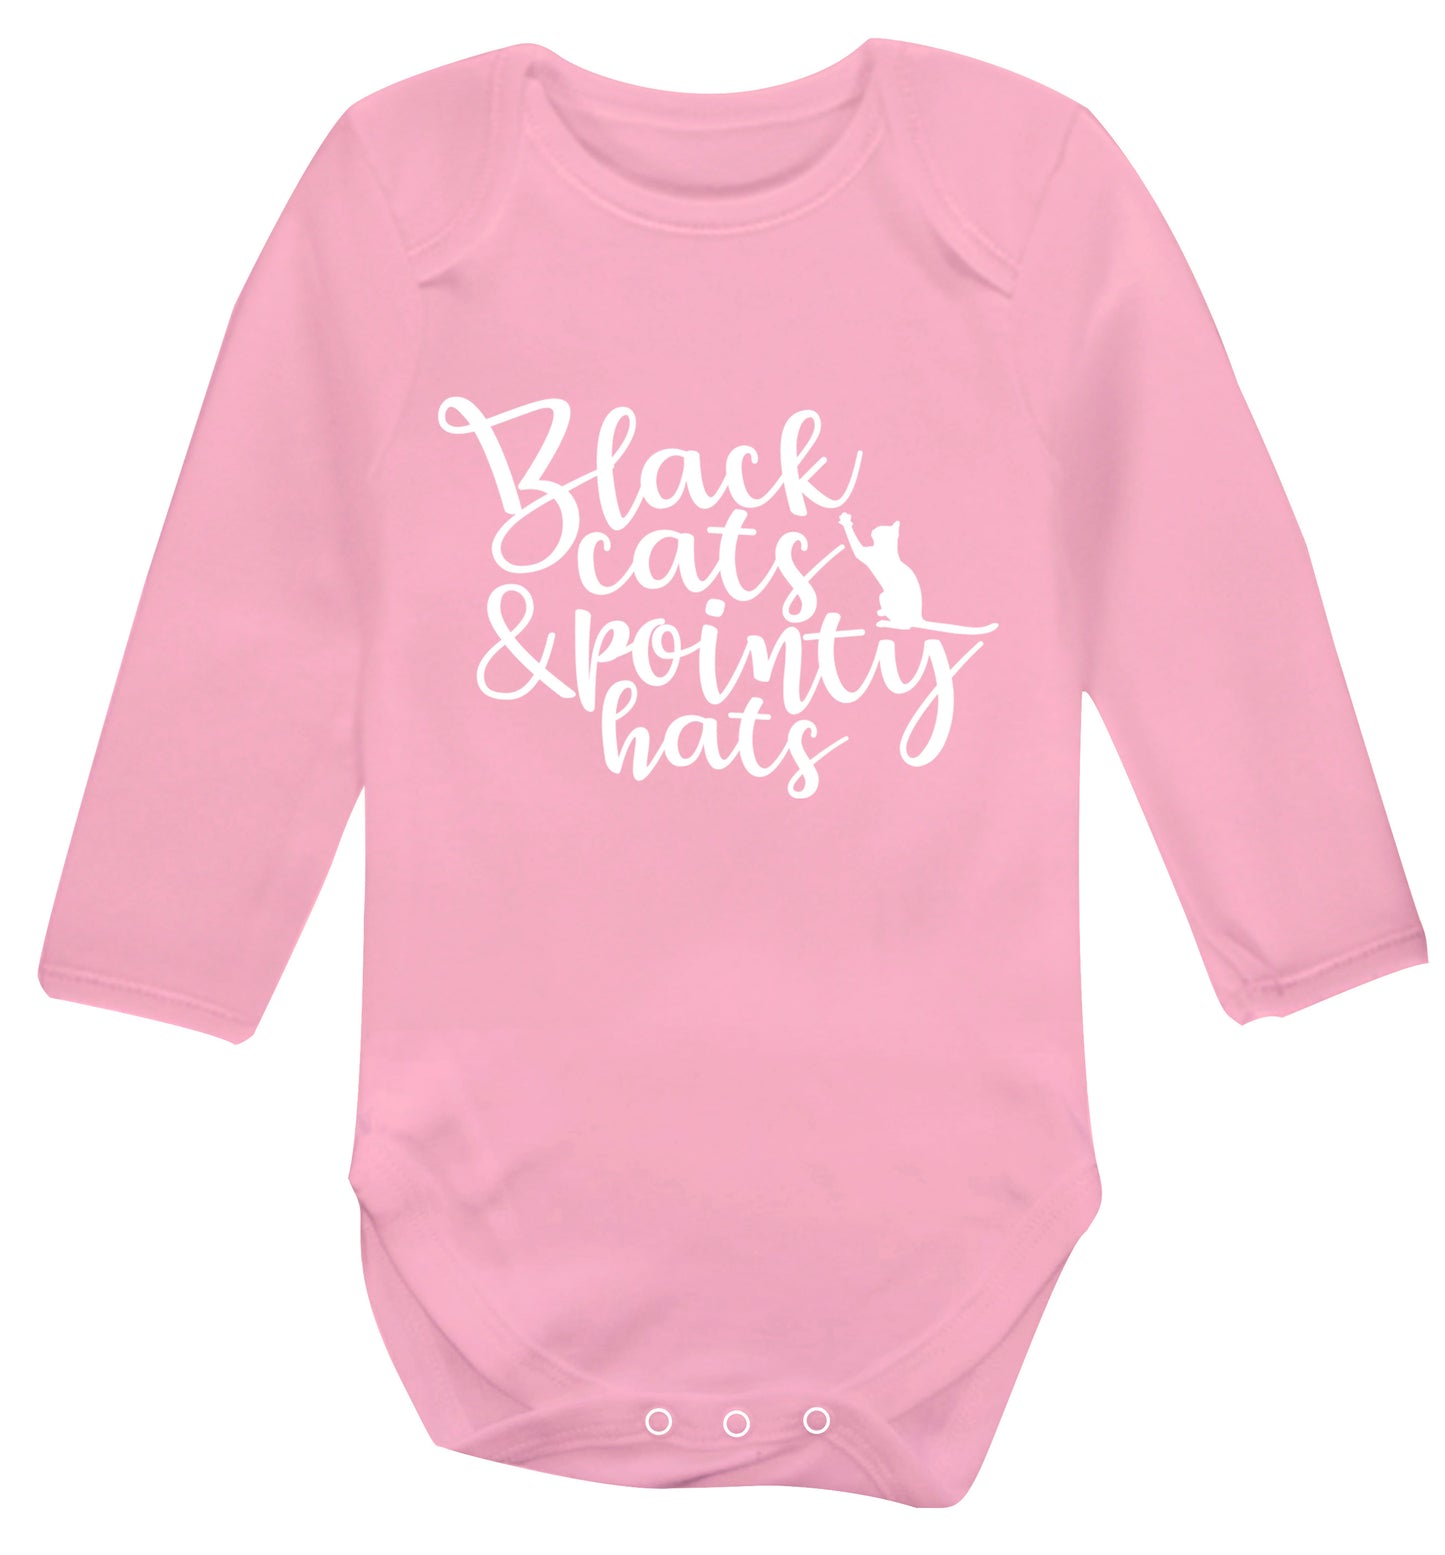 Black cats and pointy hats Baby Vest long sleeved pale pink 6-12 months